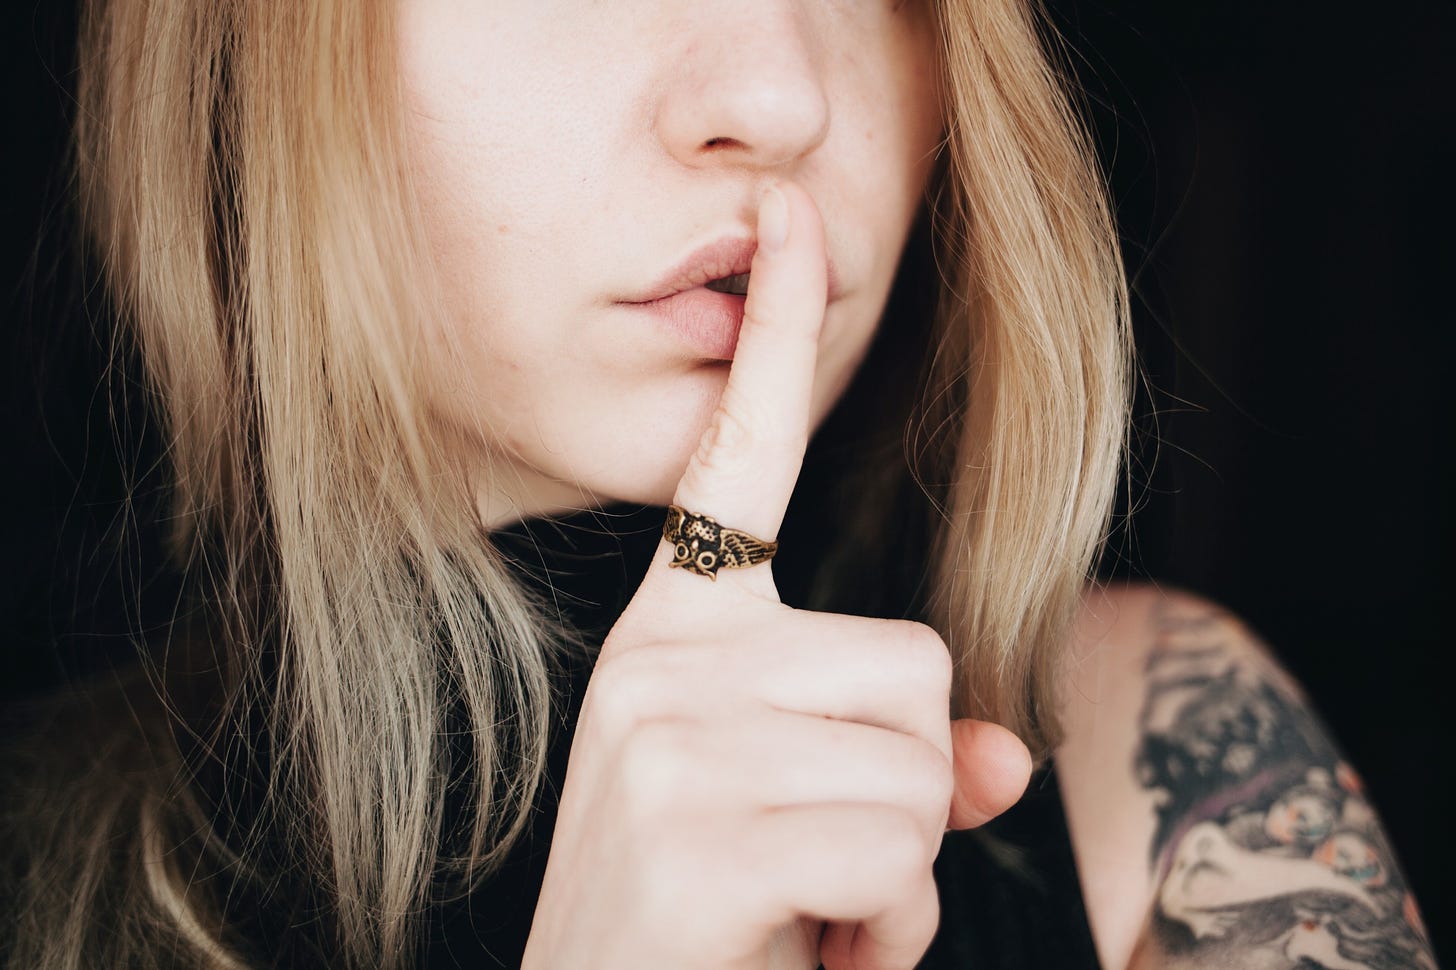 A woman presses her inidex finger to her lips in the universal sign for silence.